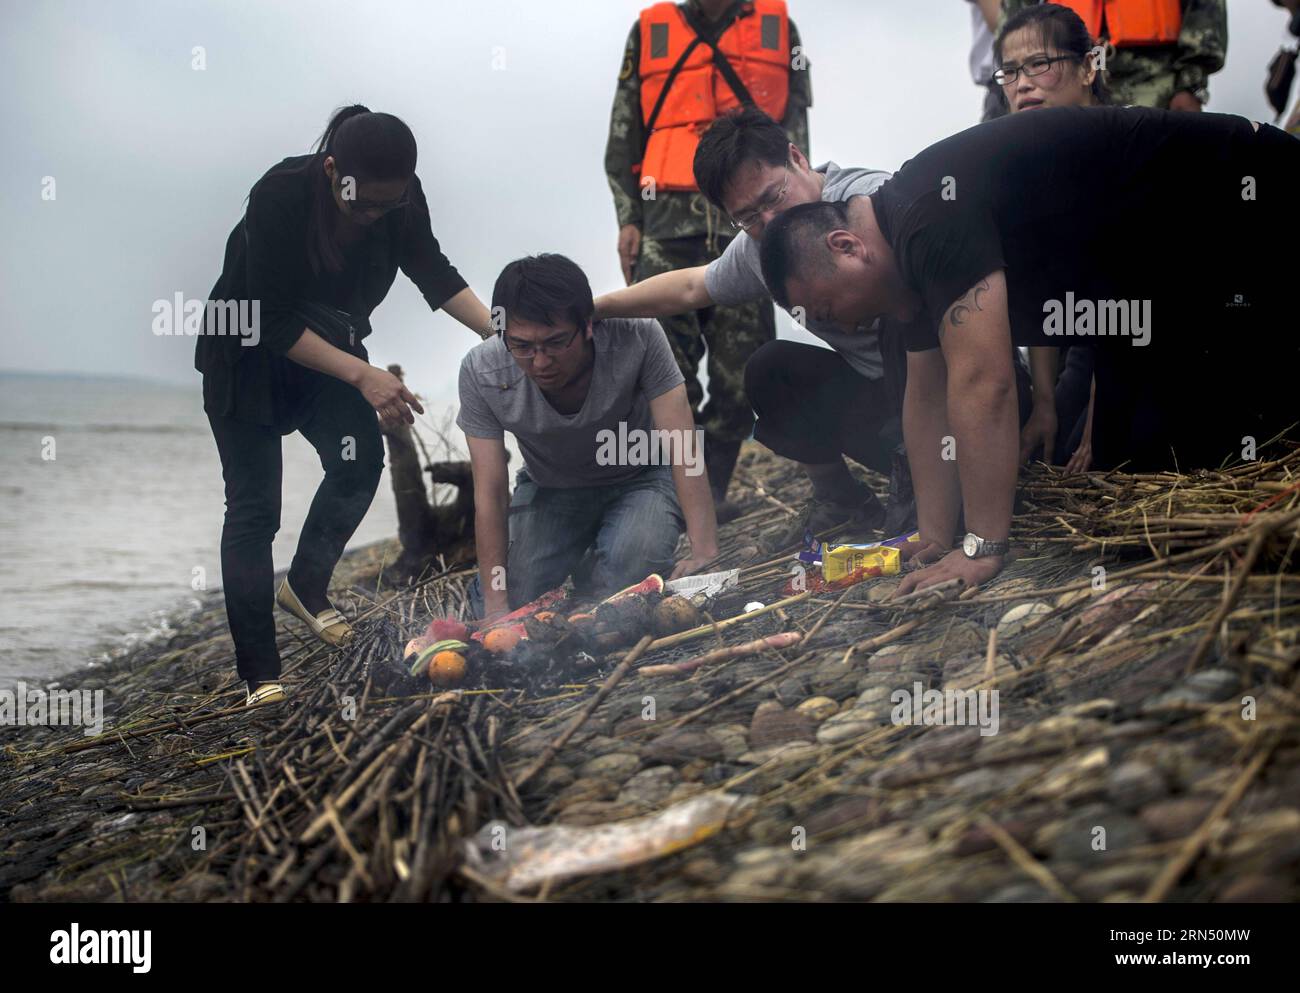 (150607) -- JIANLI, June 7, 2015 -- Relatives of the victims of the capsized ship Eastern Star mourn at the bank of the Jianli section of the Yangtze River, central China s Hubei Province, June 7, 2015. Hundreds of people gathered in the drizzle to mourn the victims of the Eastern Star disaster here on Sunday, the seventh day since the ship capsized with the loss of more than 430. According to Chinese tradition, the seventh day is a key occasion to mourn the passing of the dead. ) (zkr) CHINA-JIANLI-CAPSIZED SHIP-MOURNING(CN) XiaoxYijiu PUBLICATIONxNOTxINxCHN   Jianli June 7 2015 Relatives of Stock Photo